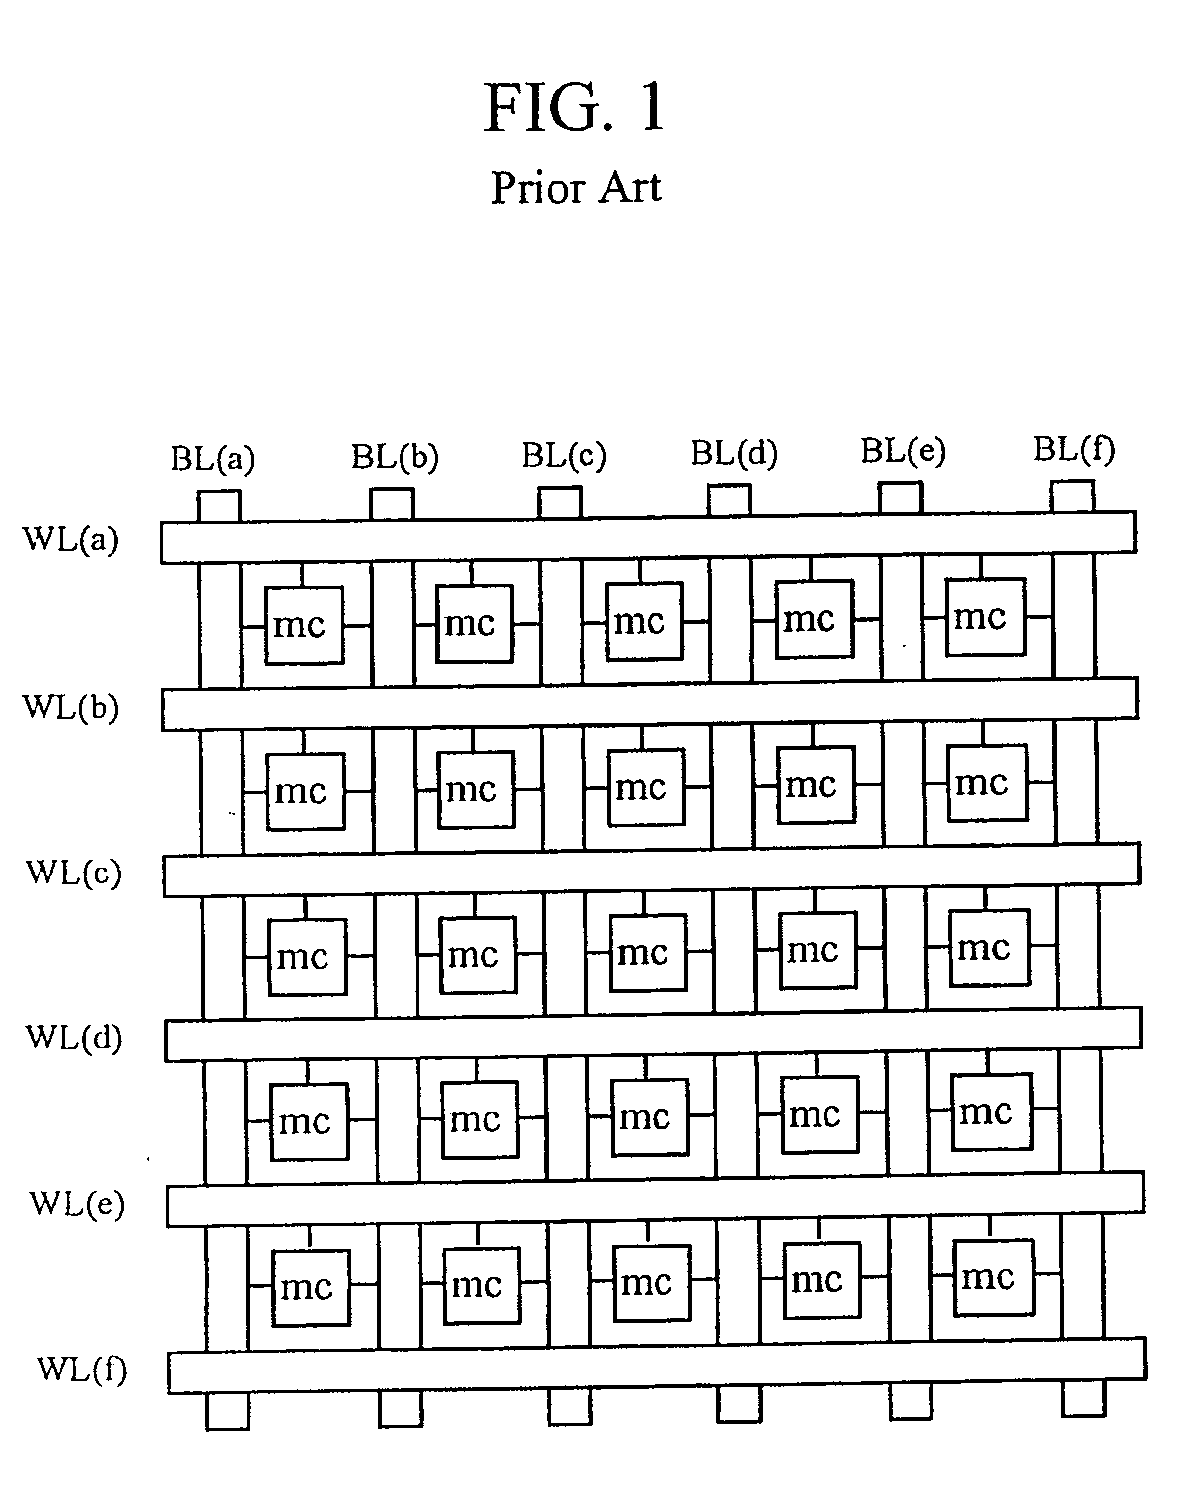 Non binary flash array architecture and method of operation